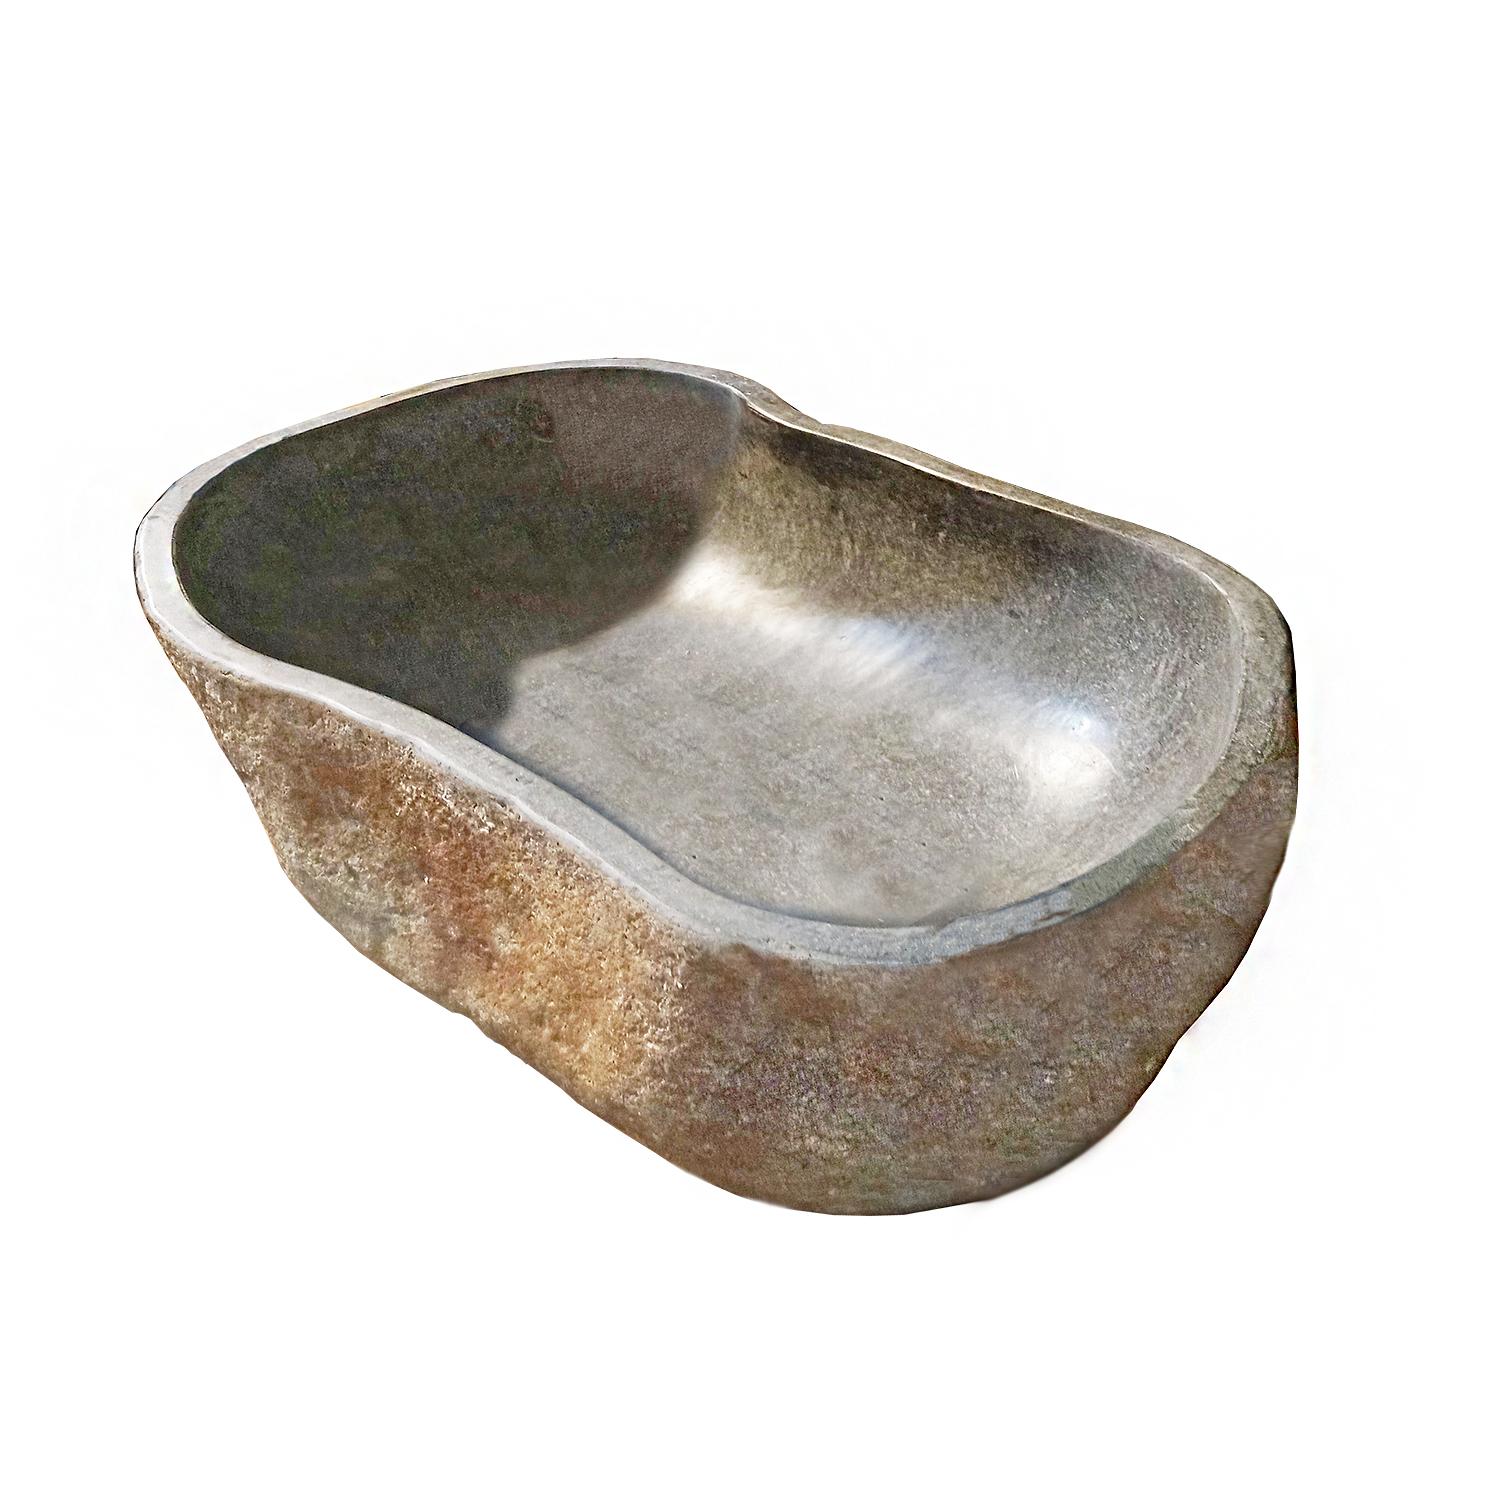 Organic Modern Stone Sink or Basin from Indonesia